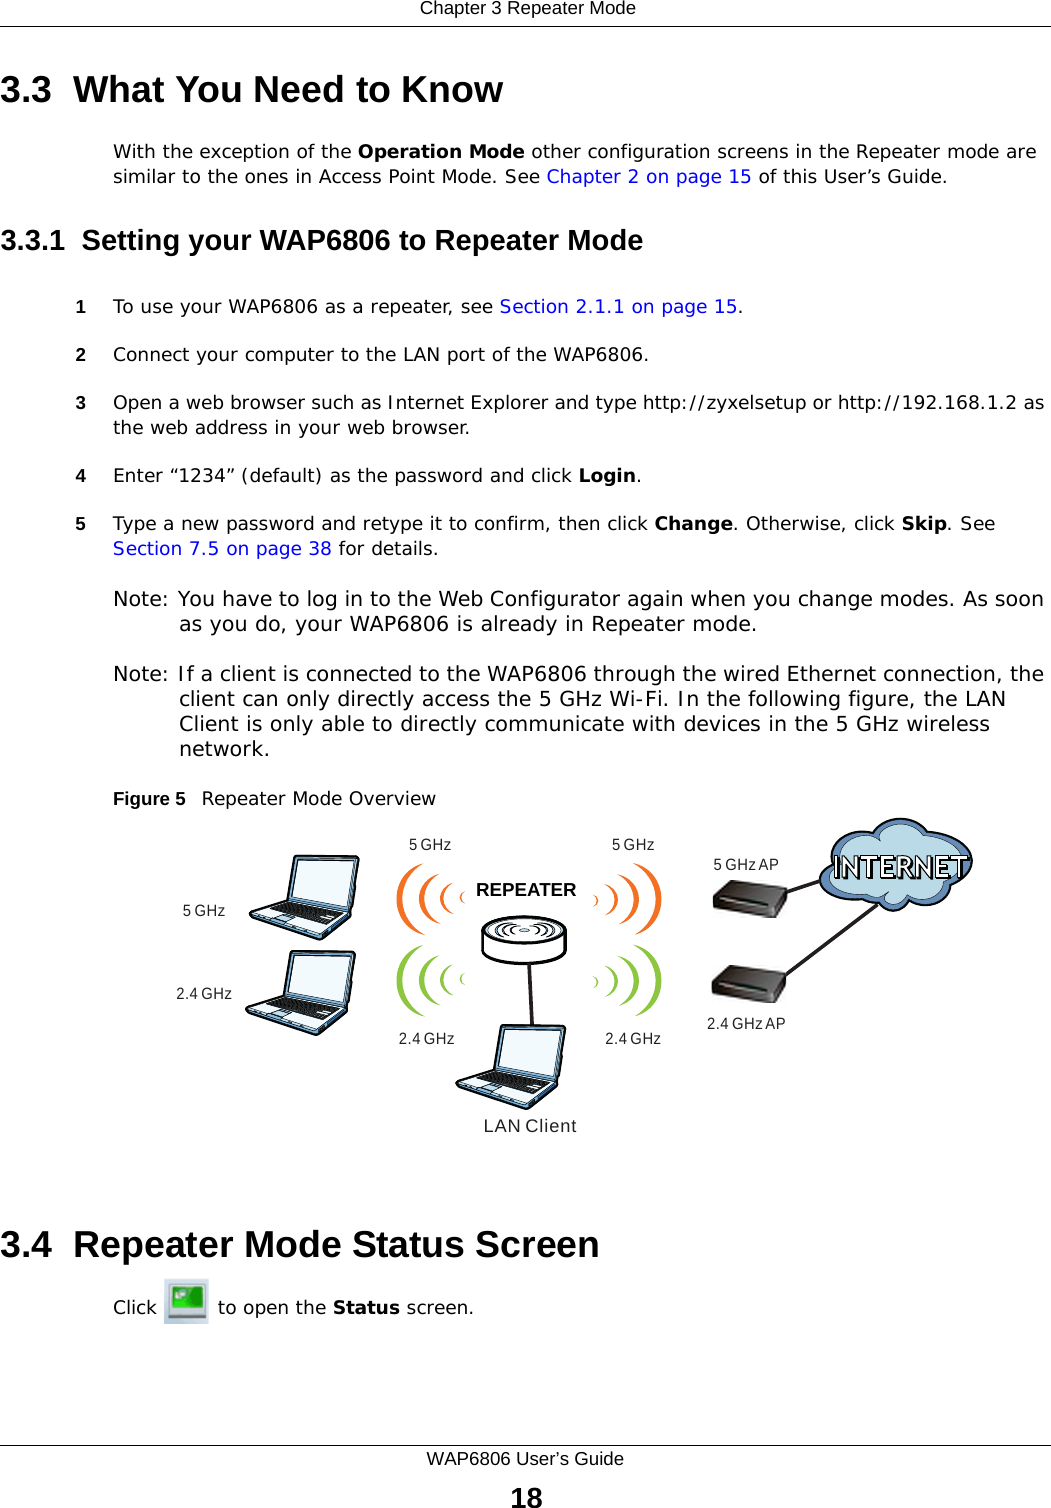  Chapter 3 Repeater ModeWAP6806 User’s Guide183.3  What You Need to KnowWith the exception of the Operation Mode other configuration screens in the Repeater mode are similar to the ones in Access Point Mode. See Chapter 2 on page 15 of this User’s Guide.3.3.1  Setting your WAP6806 to Repeater Mode1To use your WAP6806 as a repeater, see Section 2.1.1 on page 15.2Connect your computer to the LAN port of the WAP6806. 3Open a web browser such as Internet Explorer and type http://zyxelsetup or http://192.168.1.2 as the web address in your web browser.4Enter “1234” (default) as the password and click Login.5Type a new password and retype it to confirm, then click Change. Otherwise, click Skip. See Section 7.5 on page 38 for details. Note: You have to log in to the Web Configurator again when you change modes. As soon as you do, your WAP6806 is already in Repeater mode.Note: If a client is connected to the WAP6806 through the wired Ethernet connection, the client can only directly access the 5 GHz Wi-Fi. In the following figure, the LAN Client is only able to directly communicate with devices in the 5 GHz wireless network.Figure 5   Repeater Mode Overview 3.4  Repeater Mode Status ScreenClick   to open the Status screen.WRELAN Client5 GHz5 GHz AP5 GHz5 GHz2.4 GHz AP2.4 GHz2.4 GHz2.4 GHzREPEATER